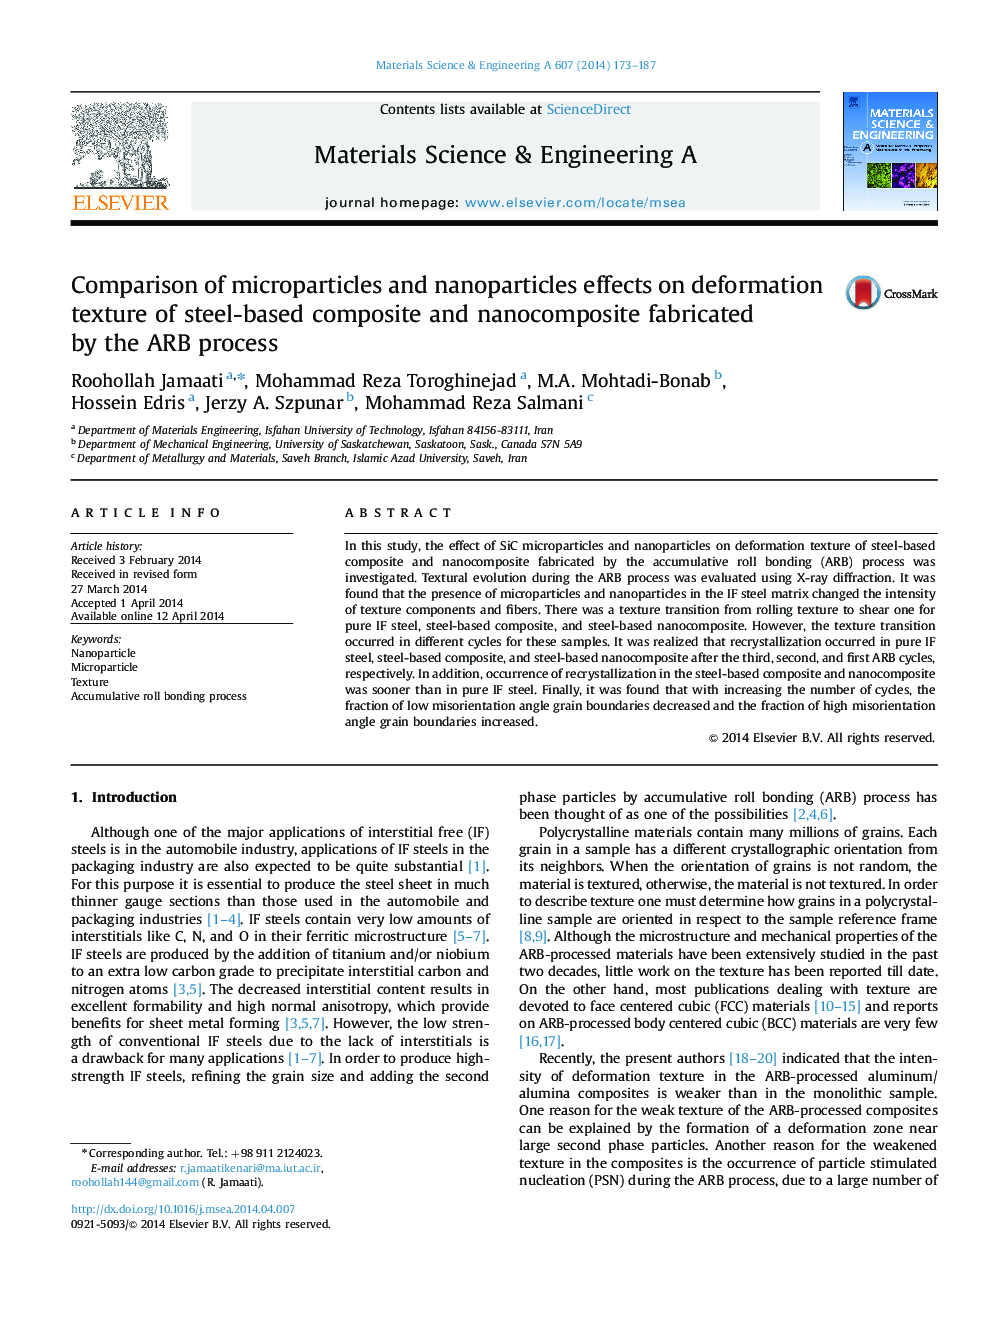 Comparison of microparticles and nanoparticles effects on deformation texture of steel-based composite and nanocomposite fabricated by the ARB process